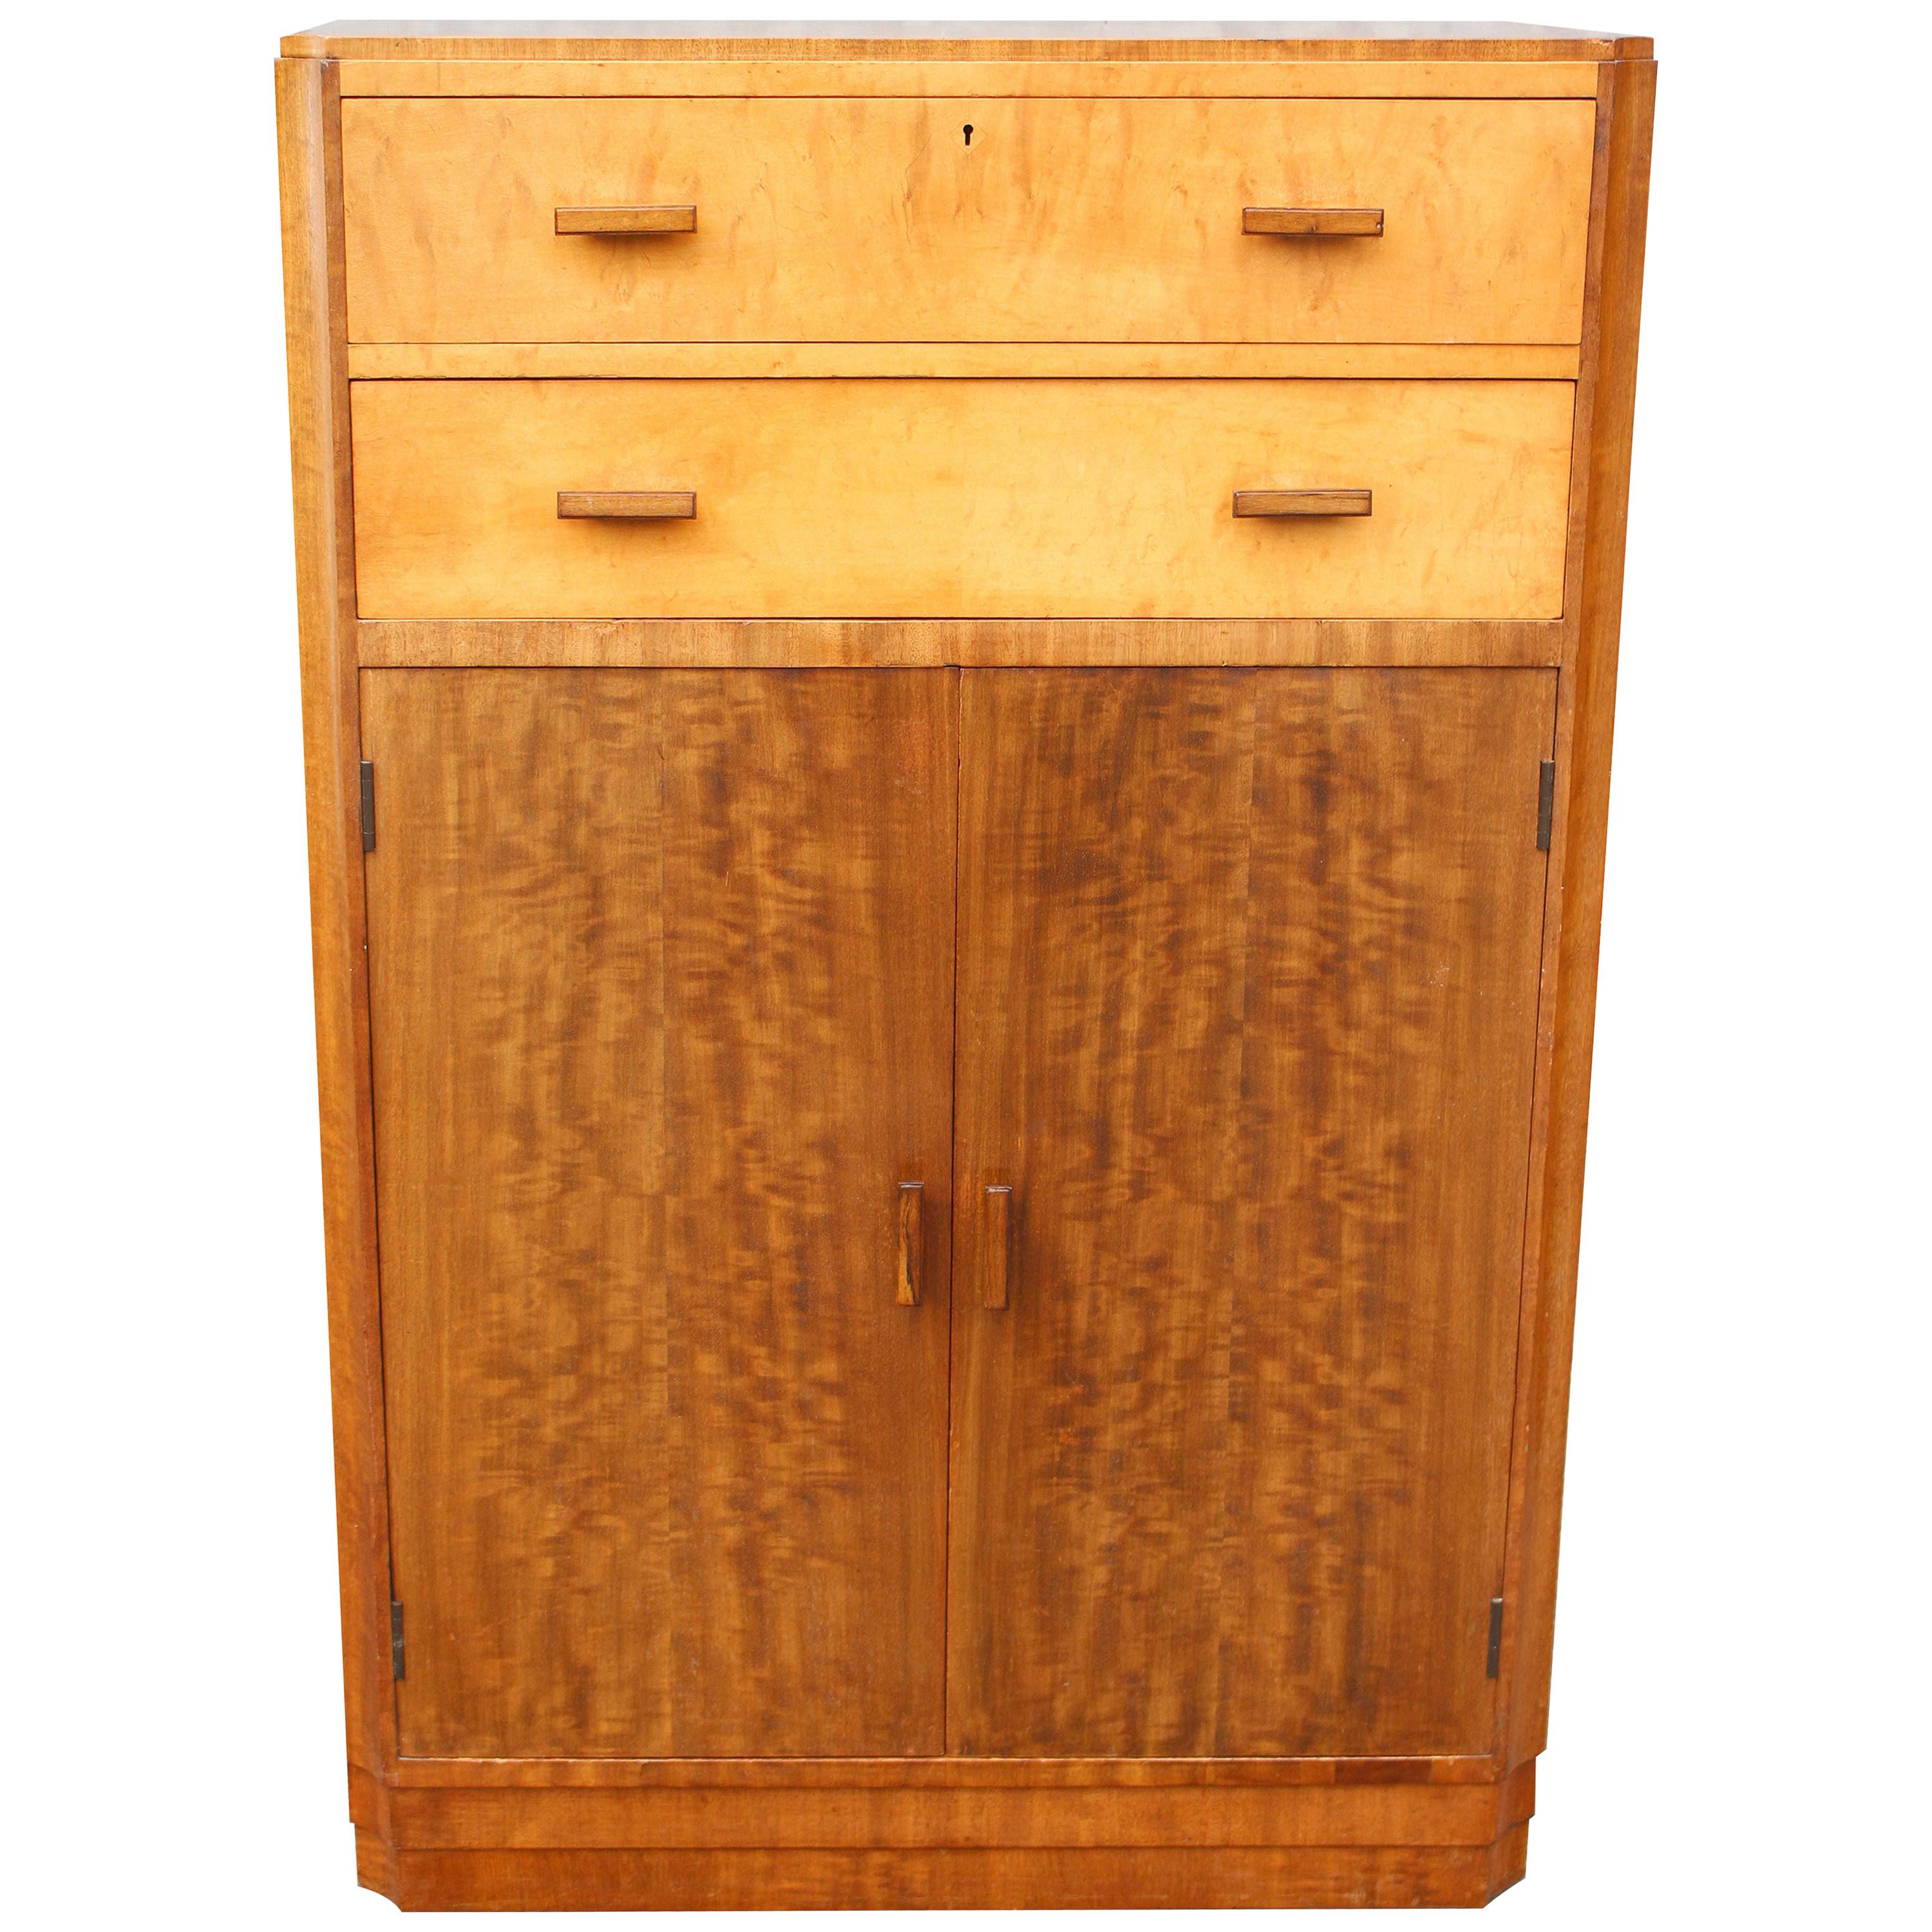 Art Deco Blonde Maple Tallboy by Maple & Co, England, c1930